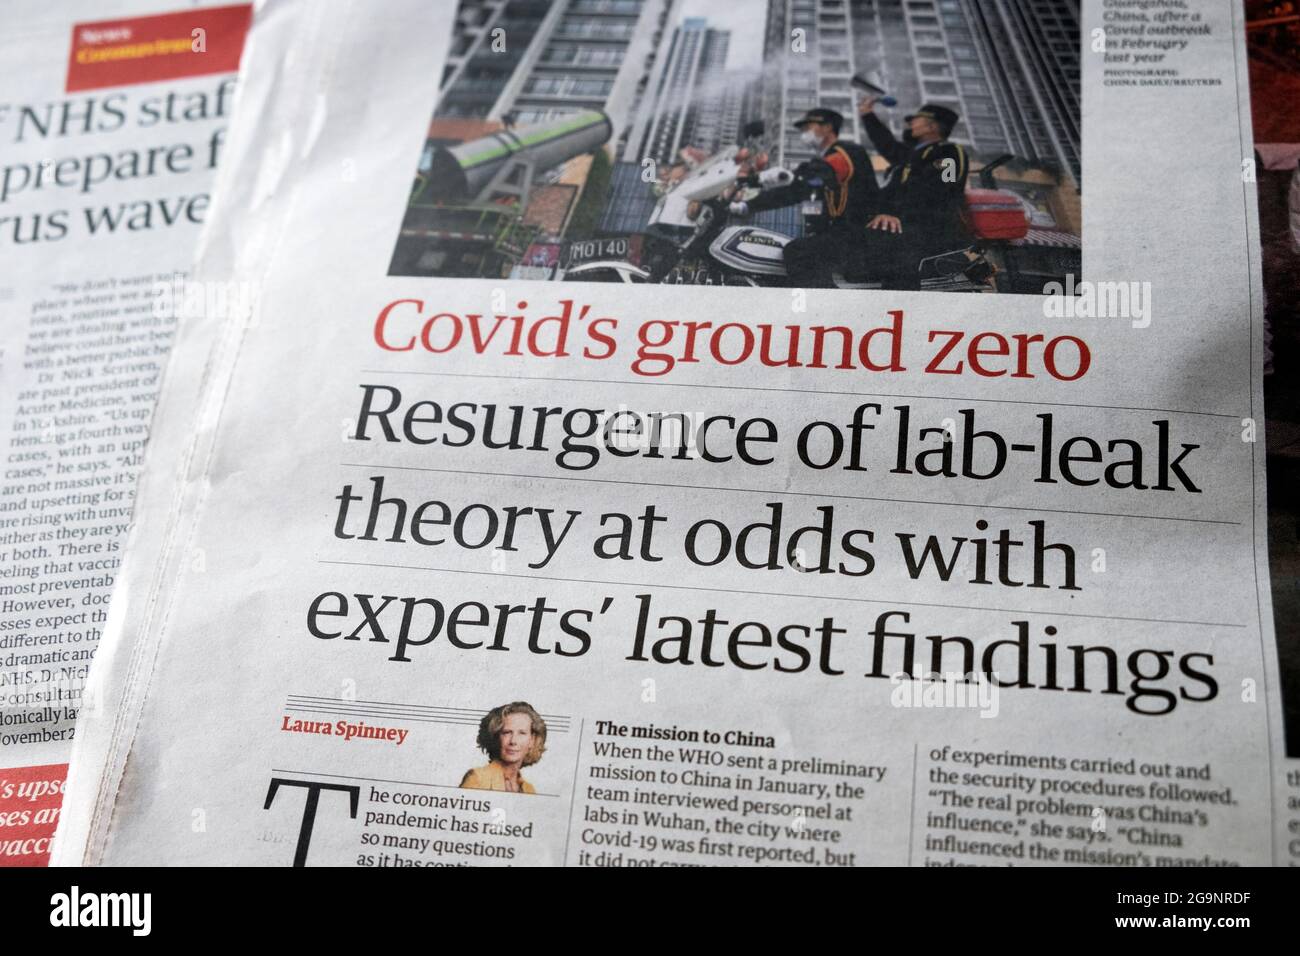 "Covid's ground zero Resurgance of lab-leak theory at odds with experts' latest findings" Guardian newspaper headline article 19 June 2021 London UK Stock Photo